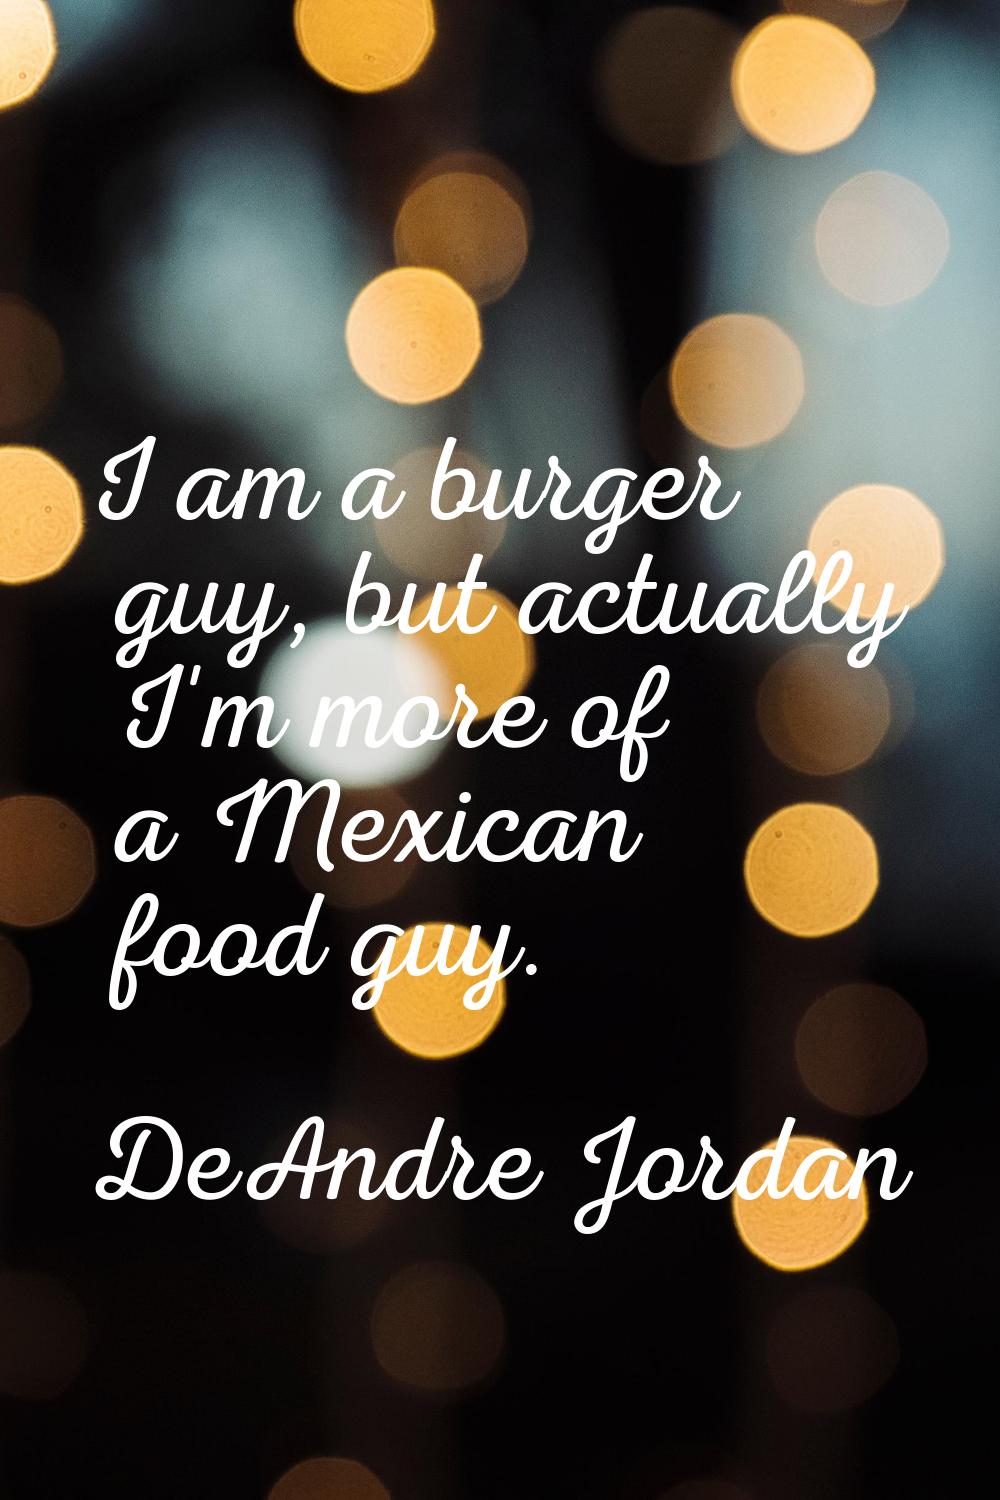 I am a burger guy, but actually I'm more of a Mexican food guy.